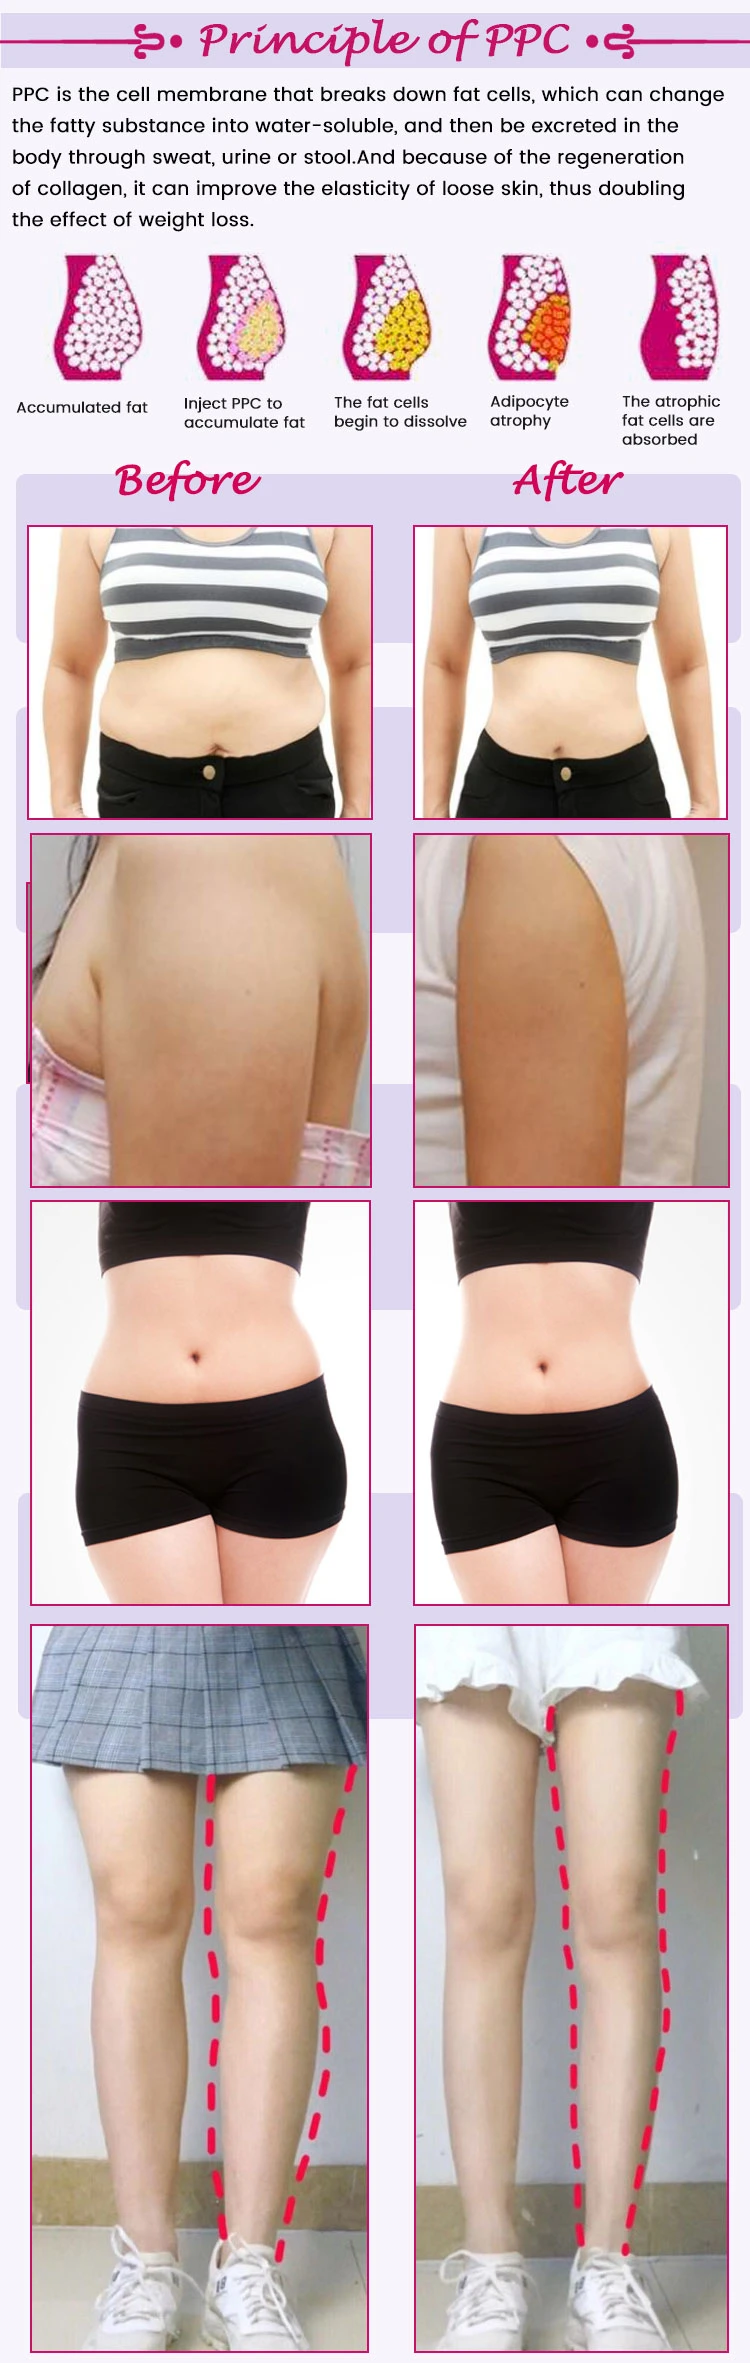 Korea Plant Extracts Lipolysis Slimming Solution Injection for Melting Subcutaneous Fat